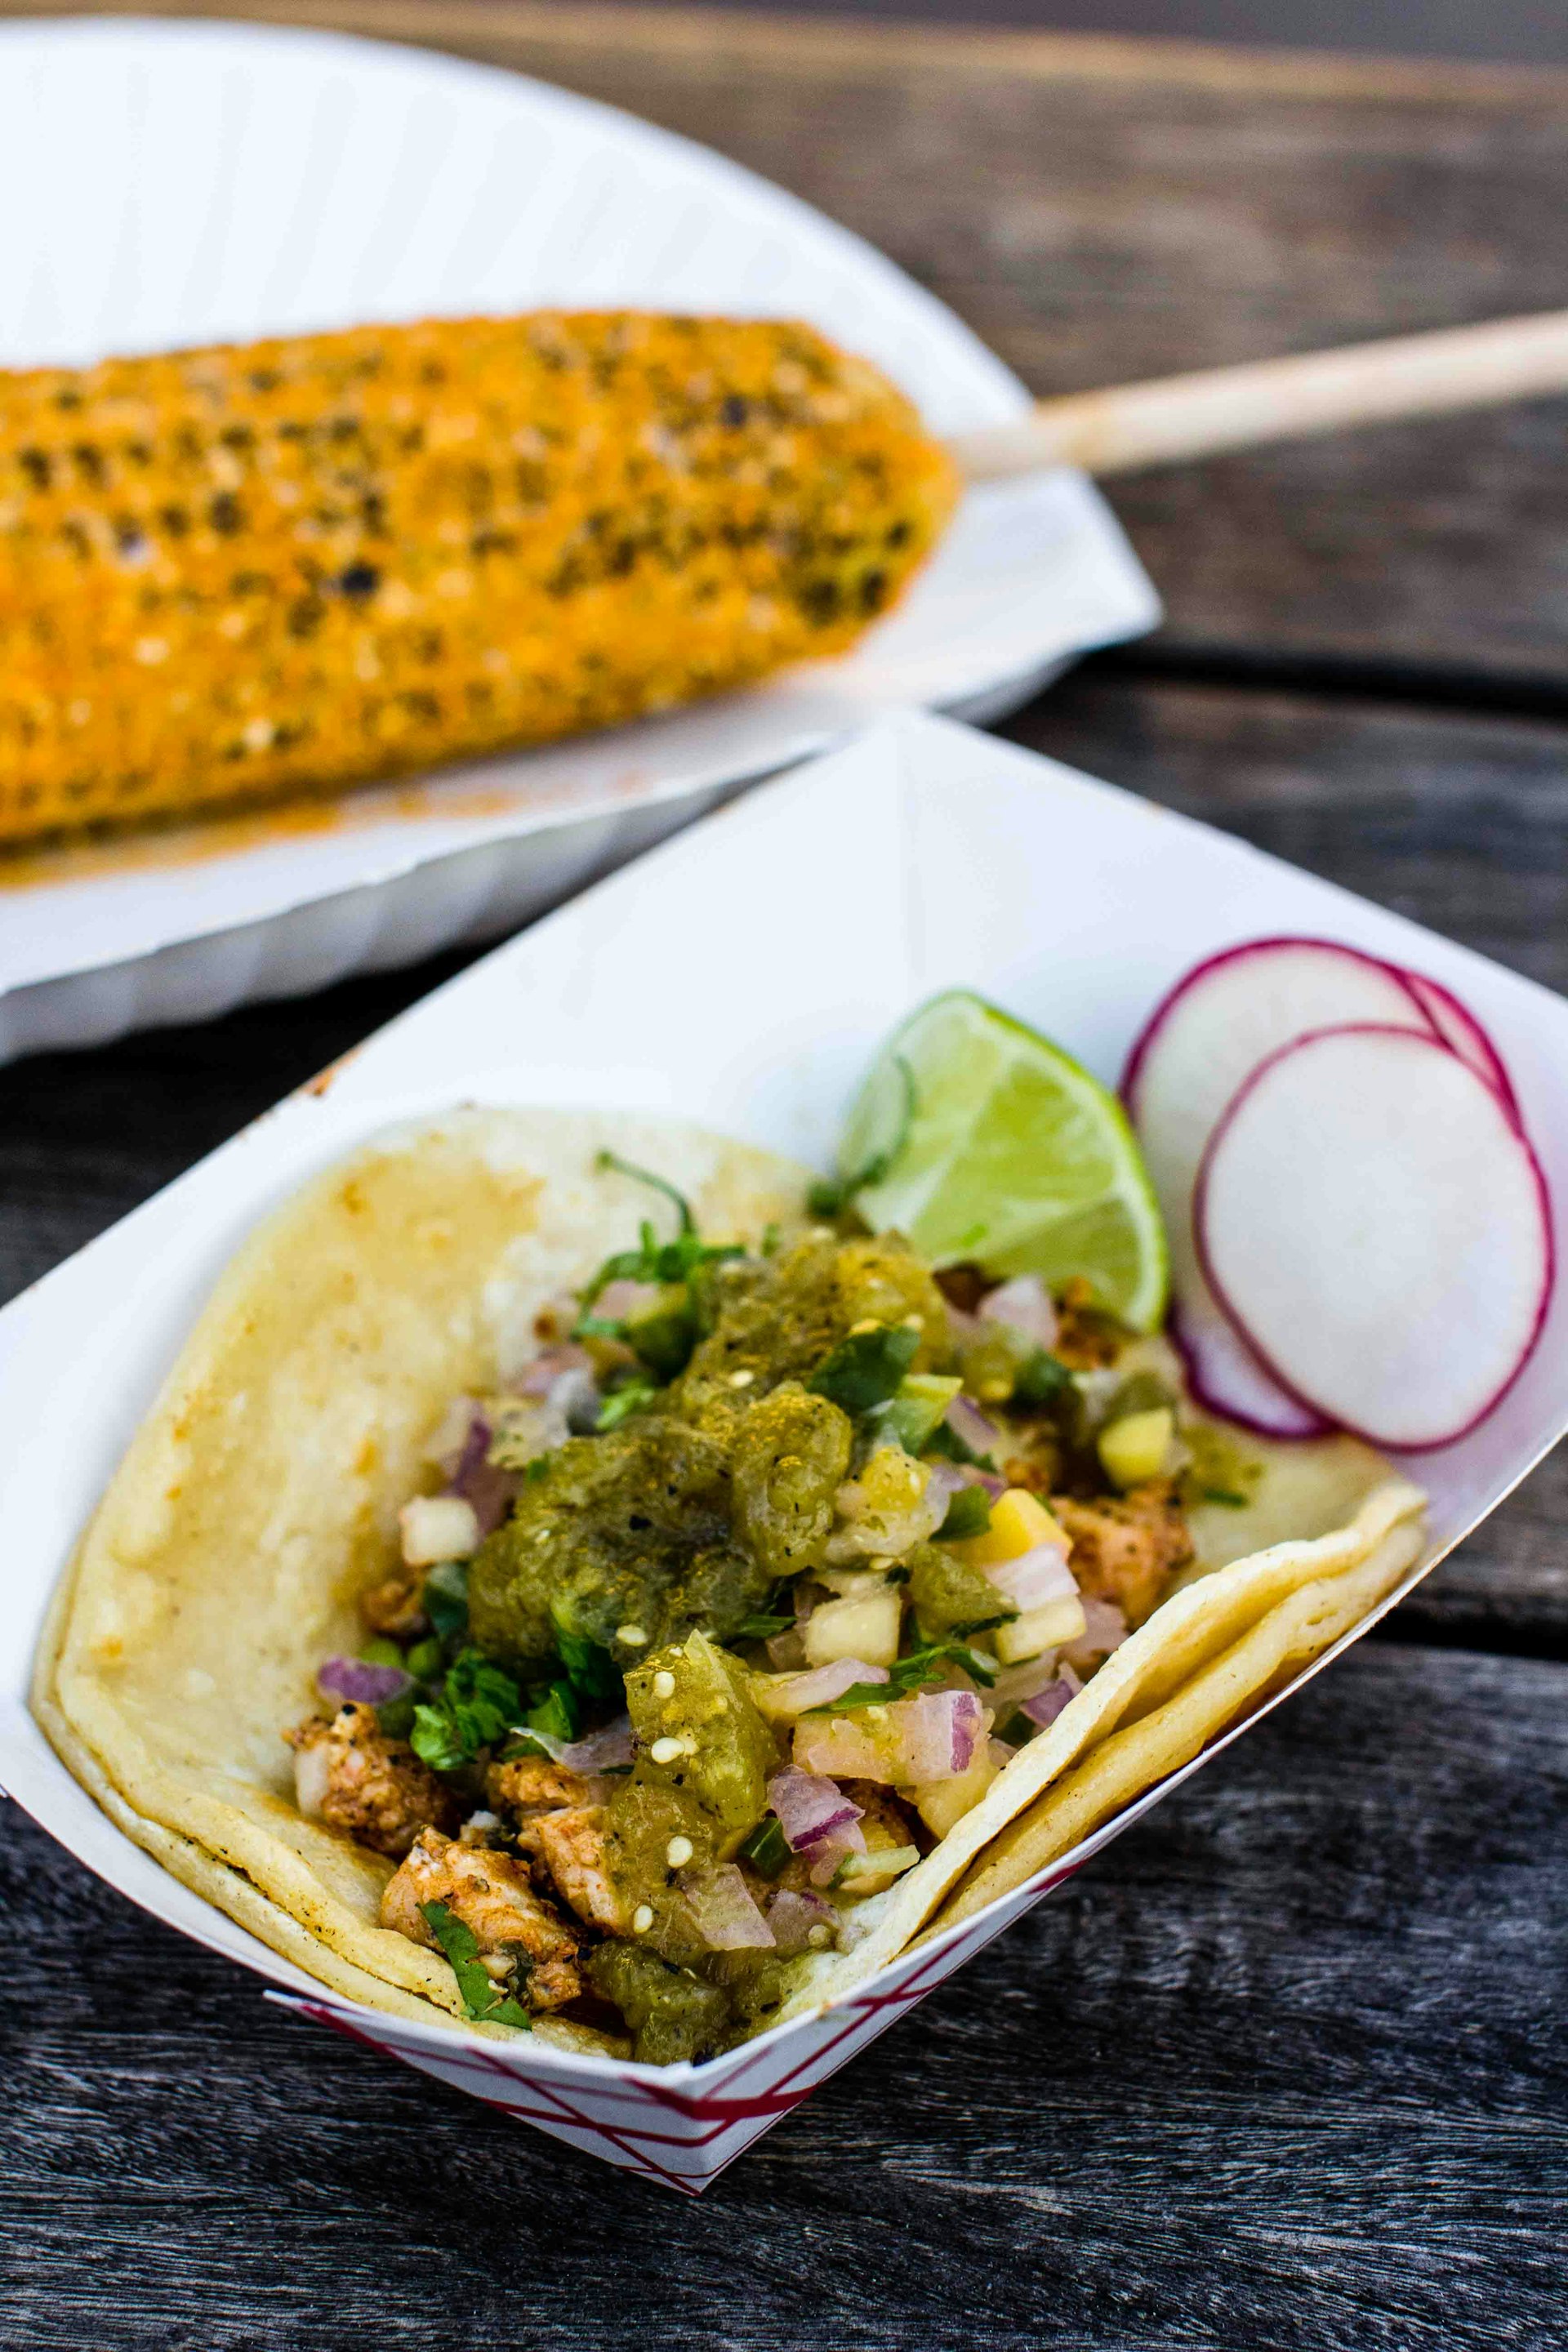 El Diable Tacos serves up a tasty fish taco topped with fresh salsa.